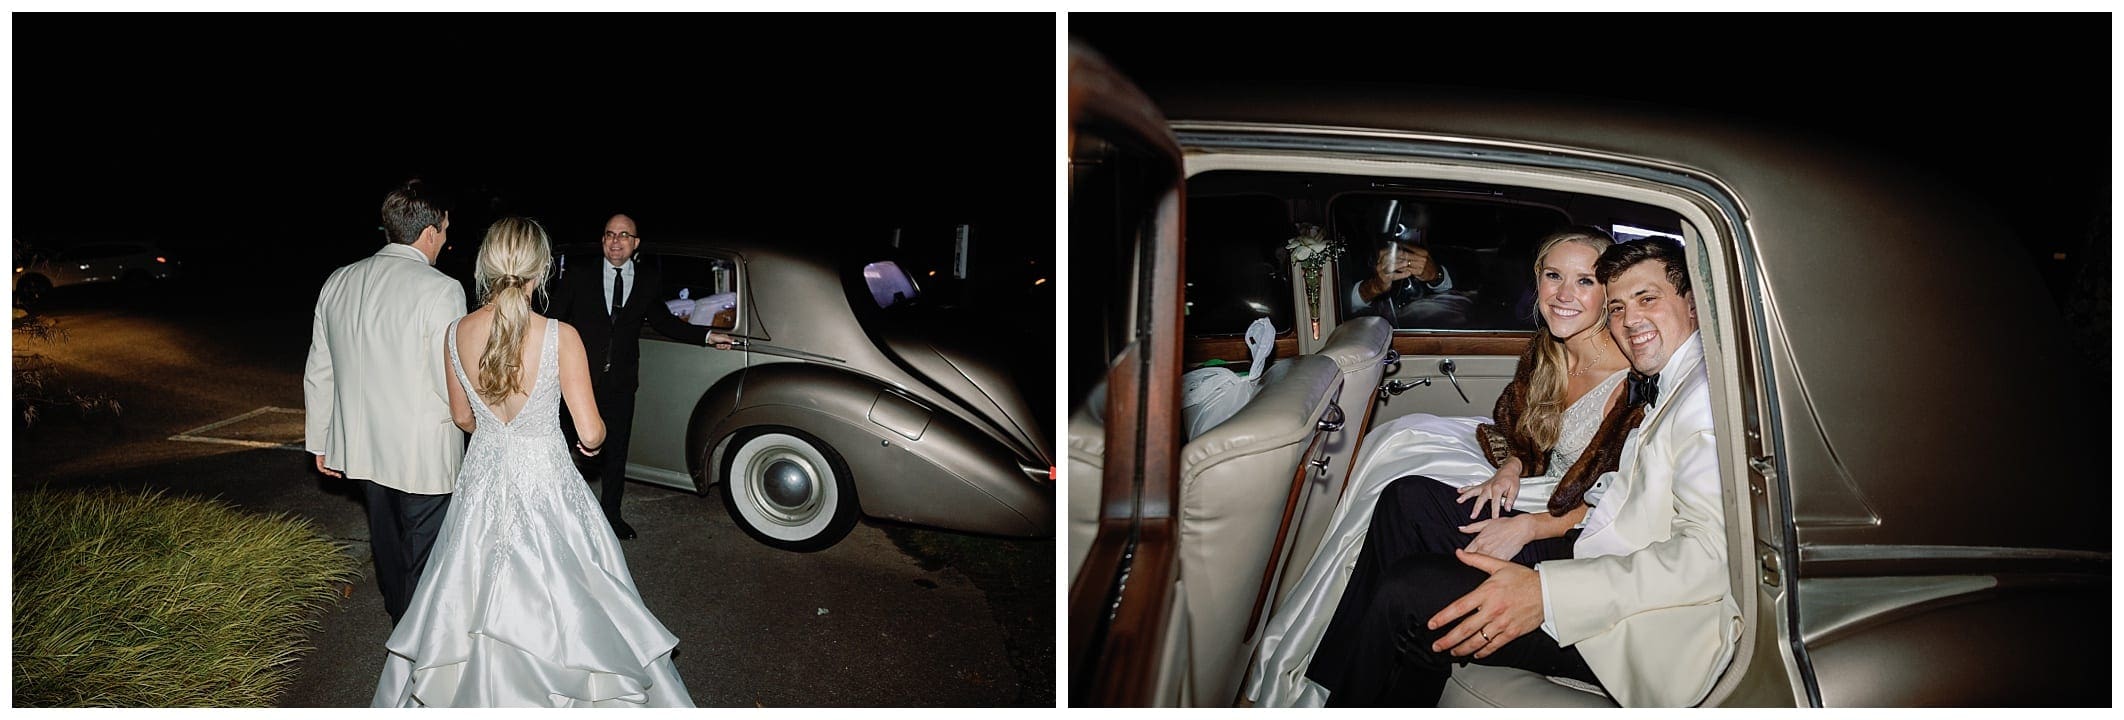 bride and groom getting in classic car at the end of their wedding